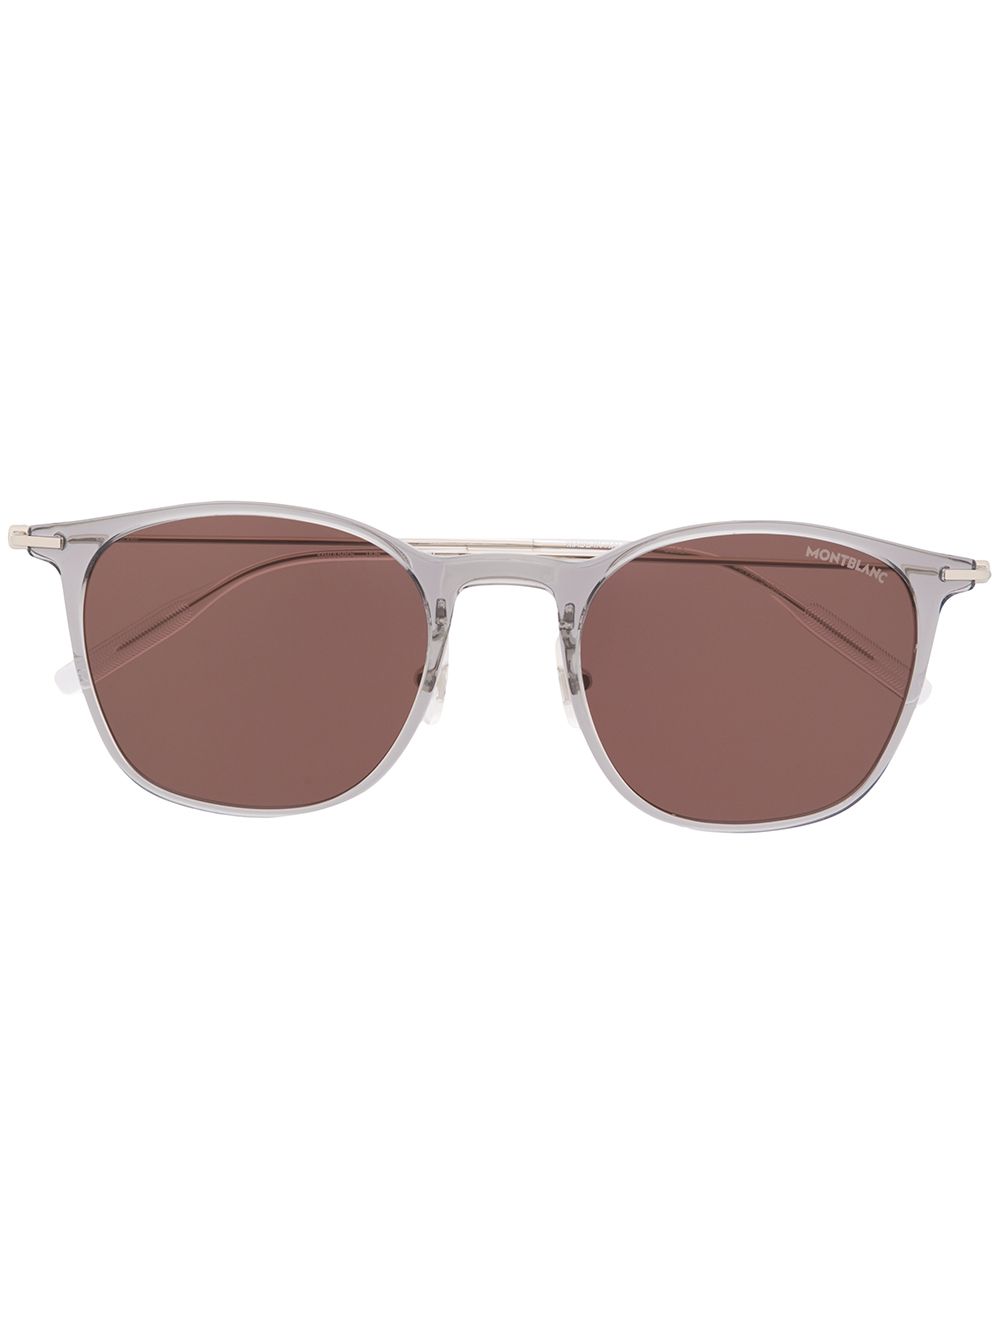 Montblanc Square Frame Sunglasses In Grey